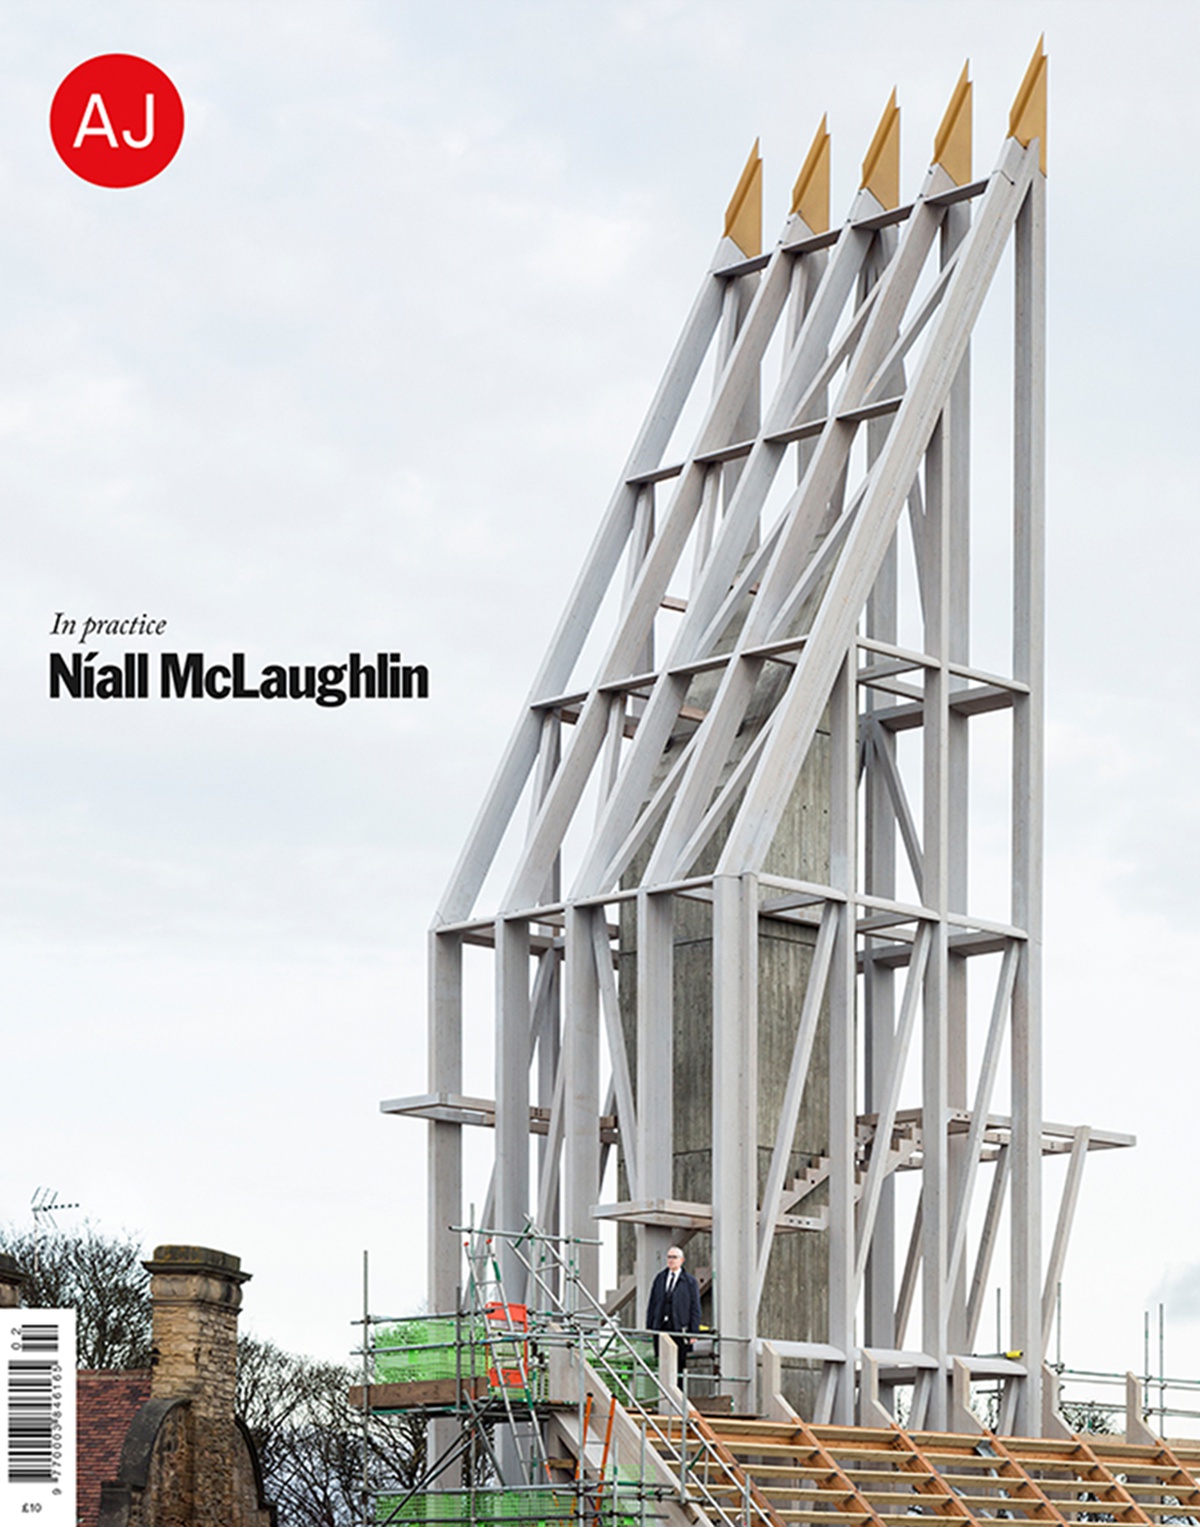 In Practice. Níall McLaughlin - Architects Journal